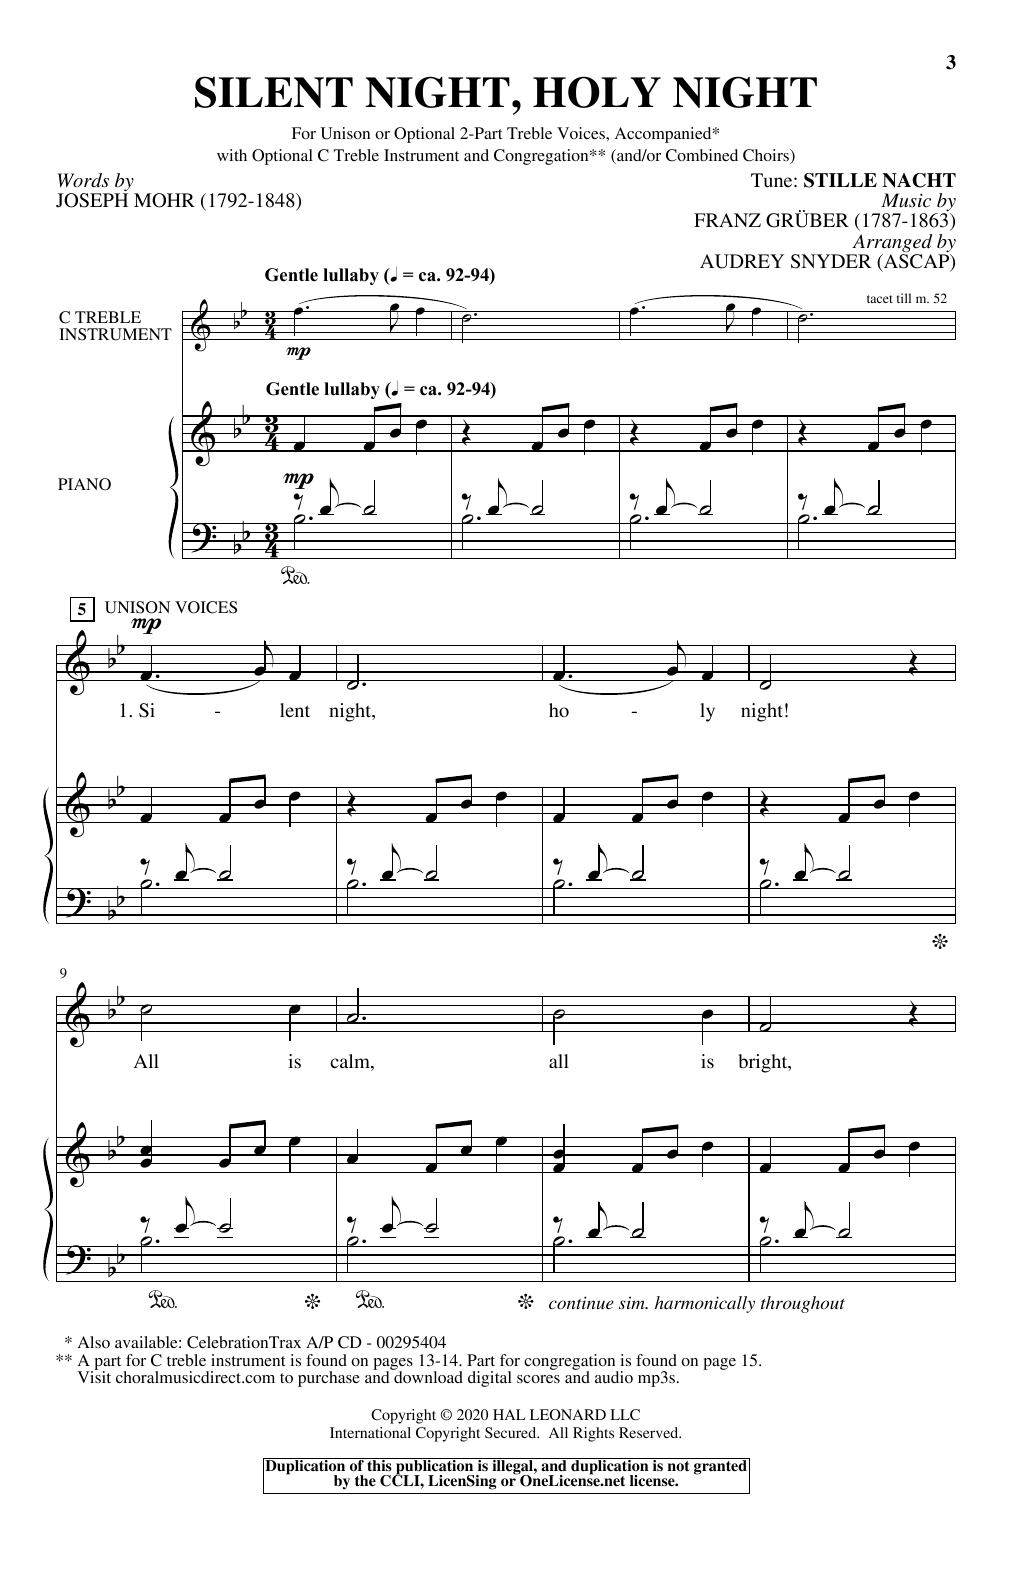 Download Joseph Mohr and Franz Gruber Silent Night, Holy Night (arr. Audrey S Sheet Music